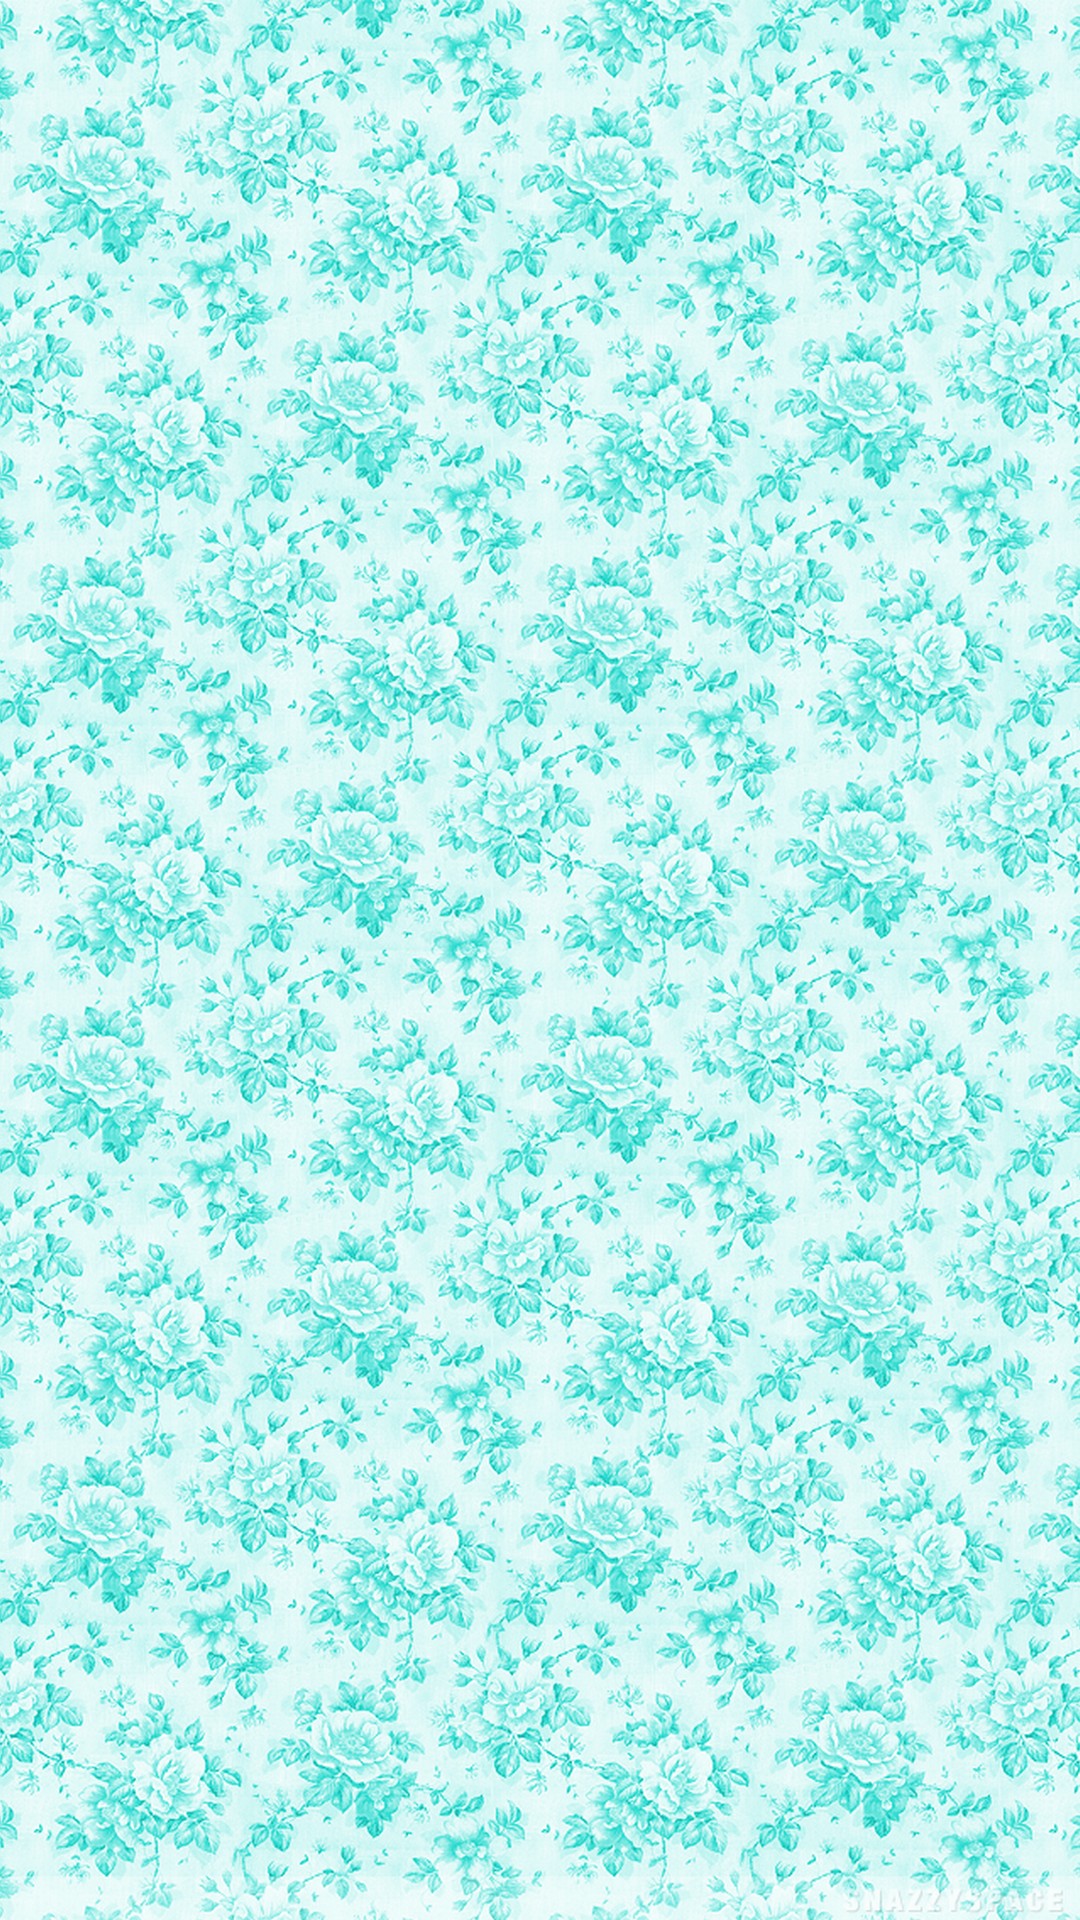 Blue Green Wallpaper For Android with image resolution 1080x1920 pixel. You can make this wallpaper for your Android backgrounds, Tablet, Smartphones Screensavers and Mobile Phone Lock Screen